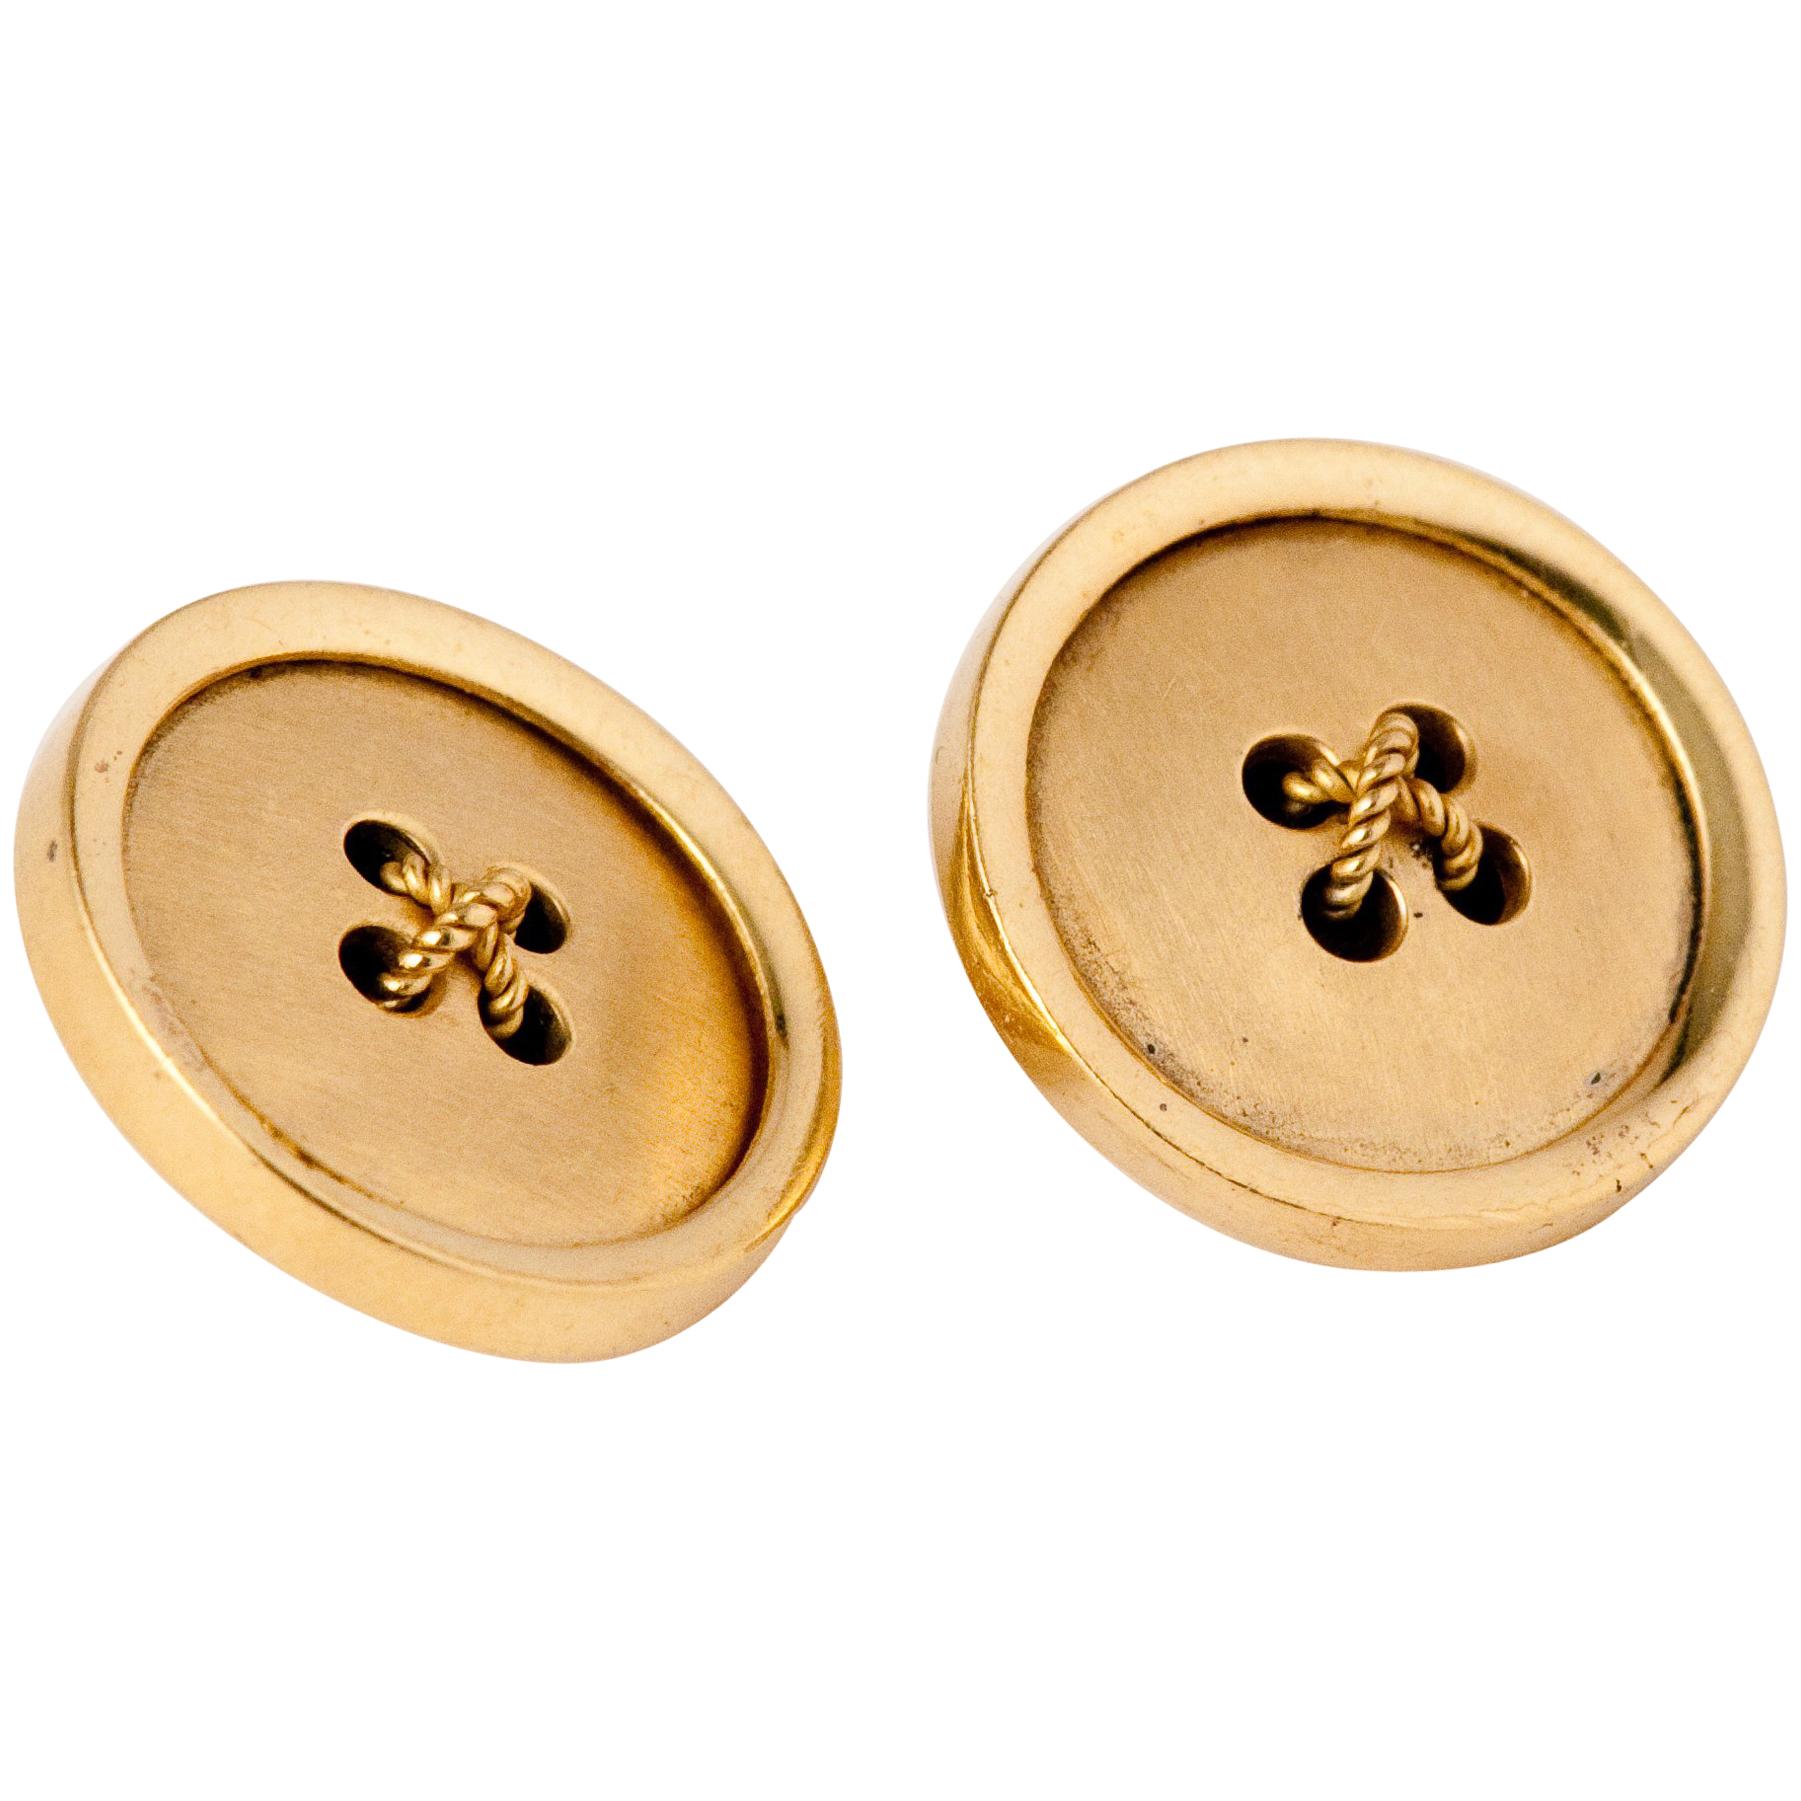 Gucci Button in Gold 18 Carat